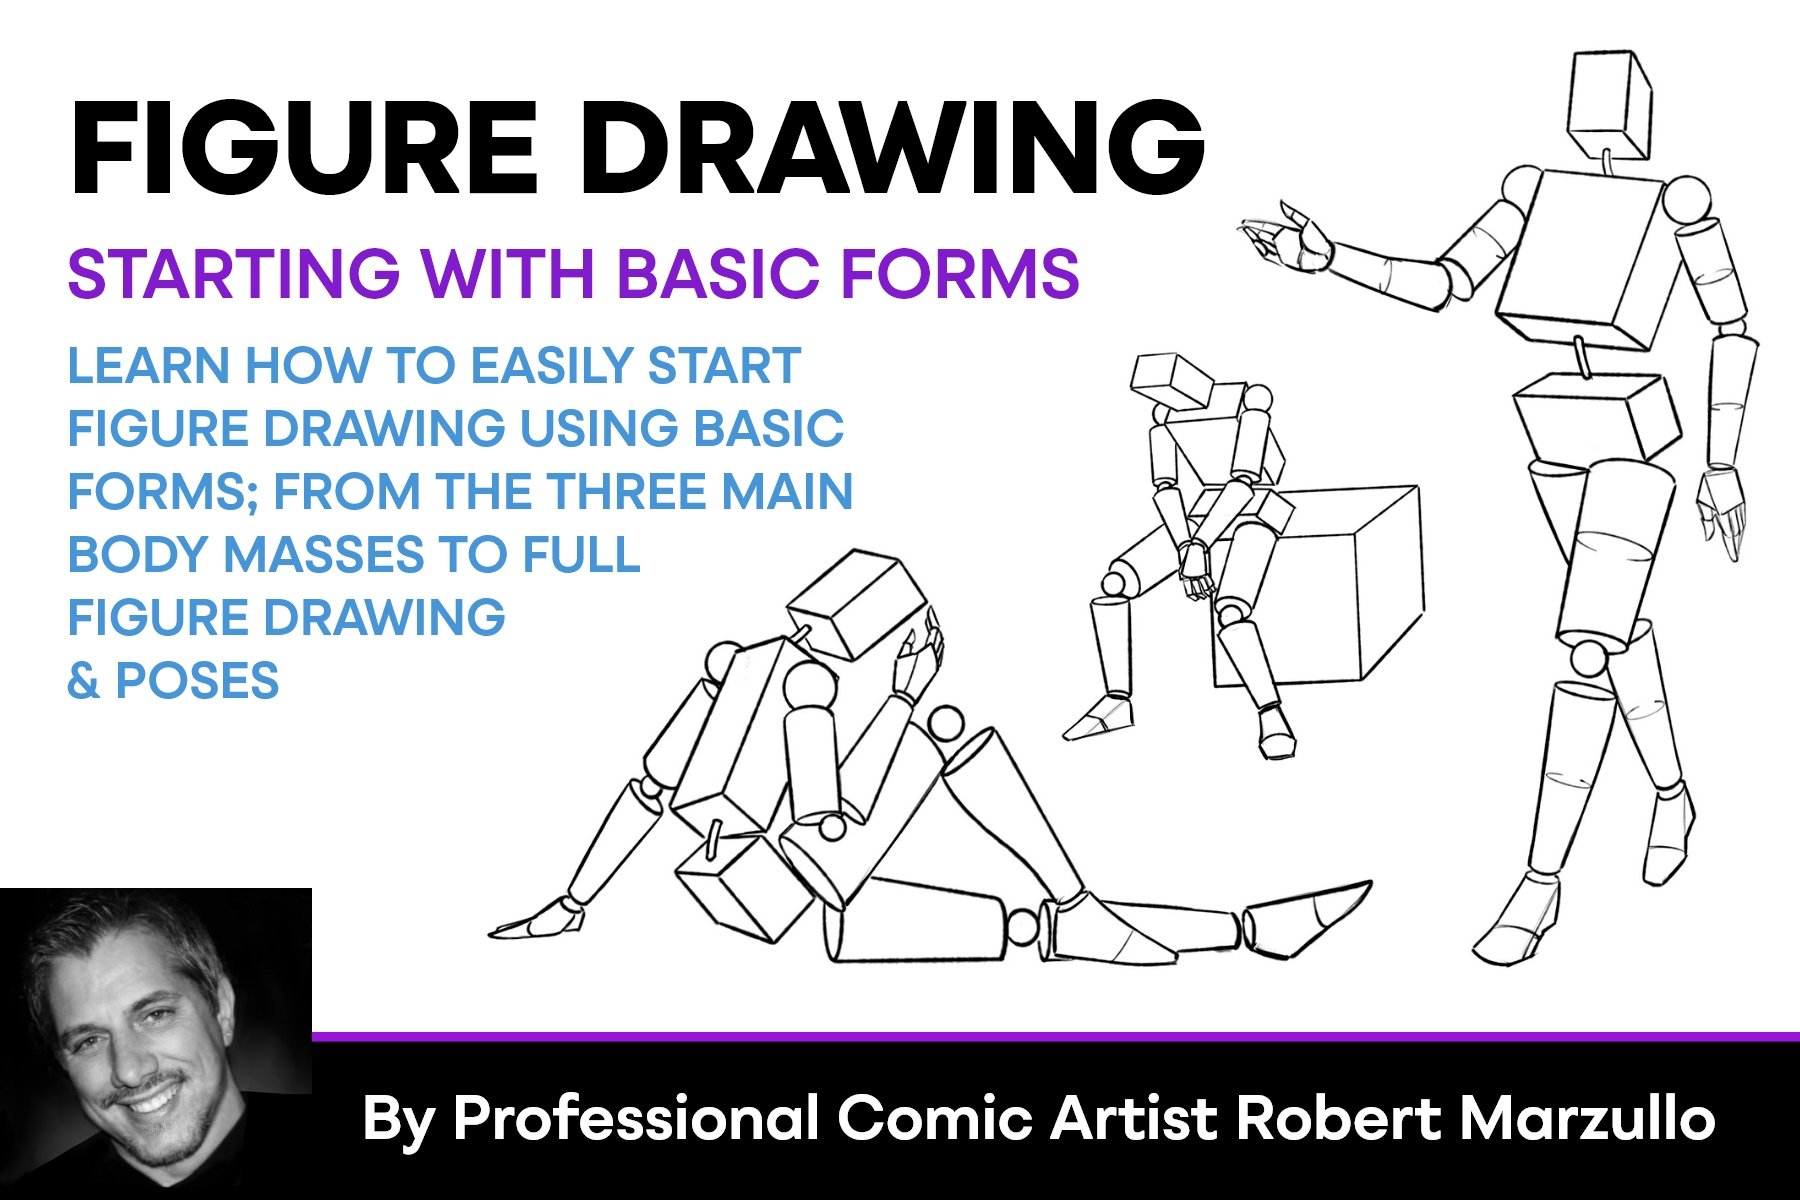 Poses for Artists Volume 6 - Various Male & Female Poses: An Essential  Reference for Figure Drawing and the Human Form by Justin R. Martin |  Goodreads